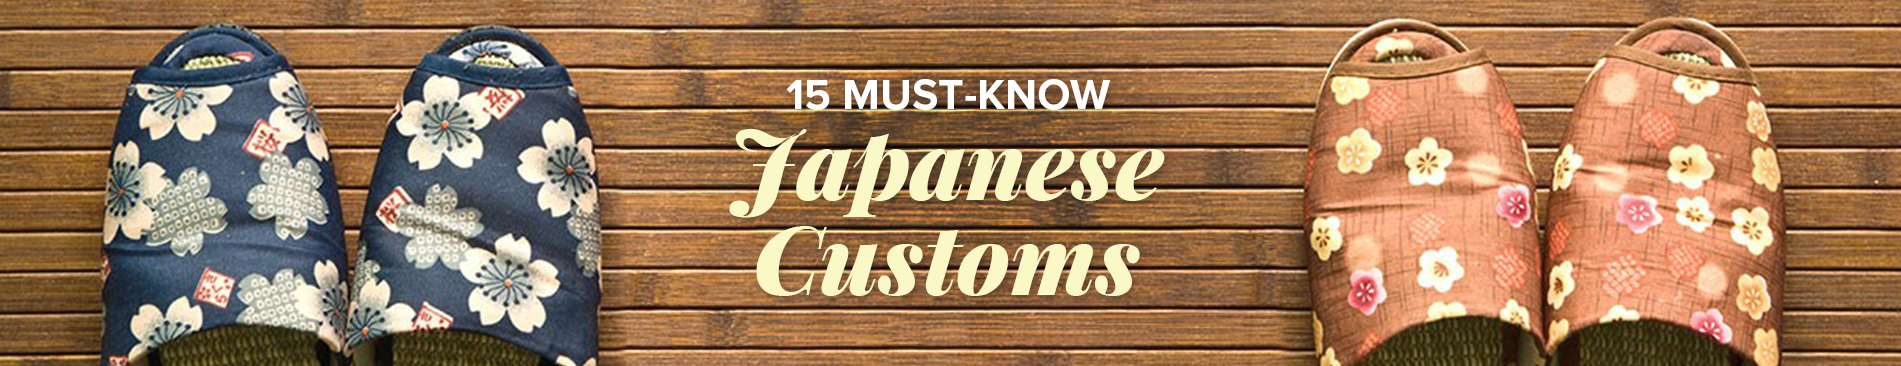 15 Must-Know Japanese Customs